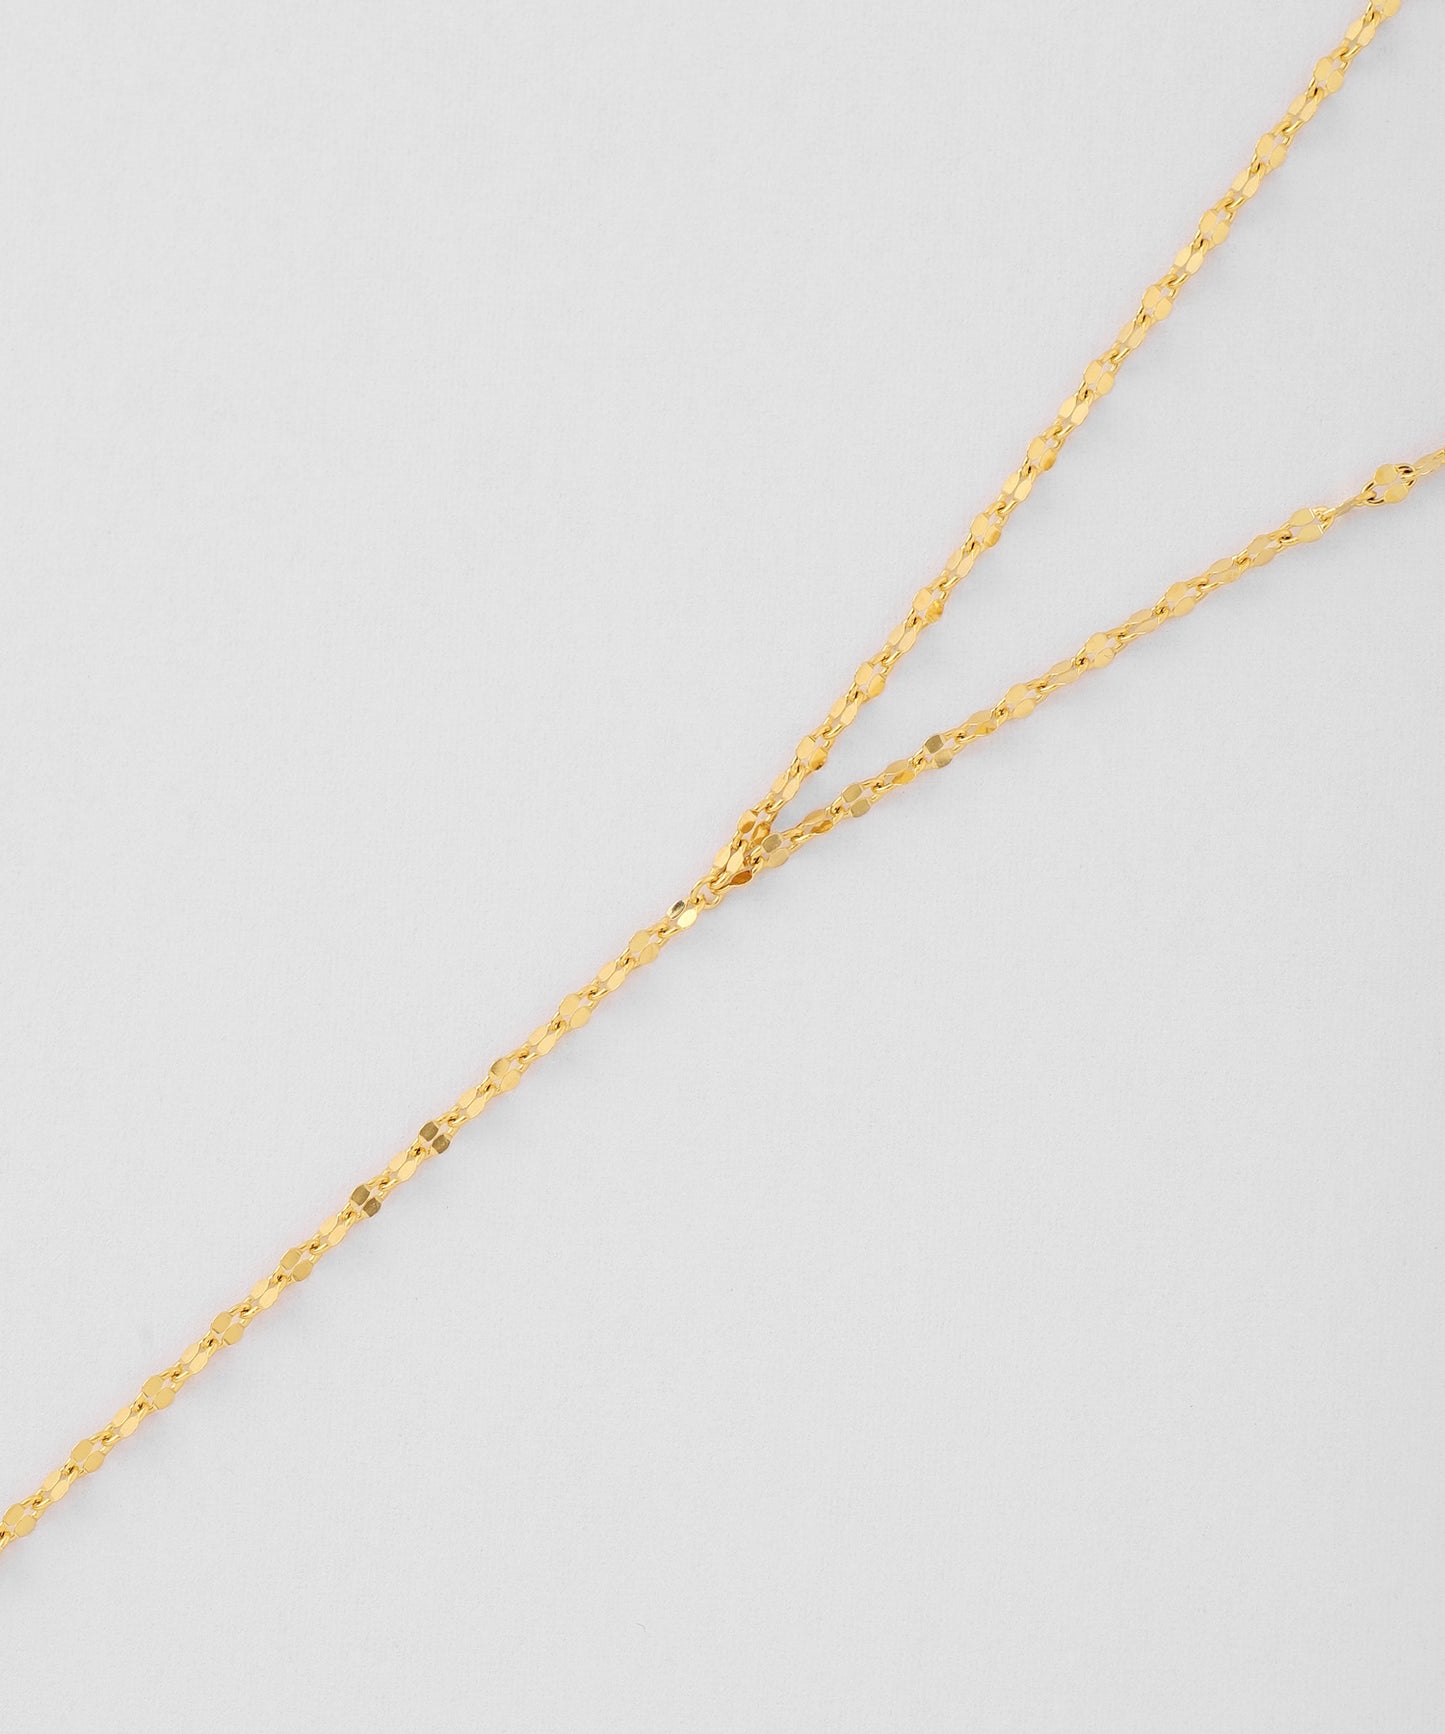 Eclair chain Y Shaped Necklace